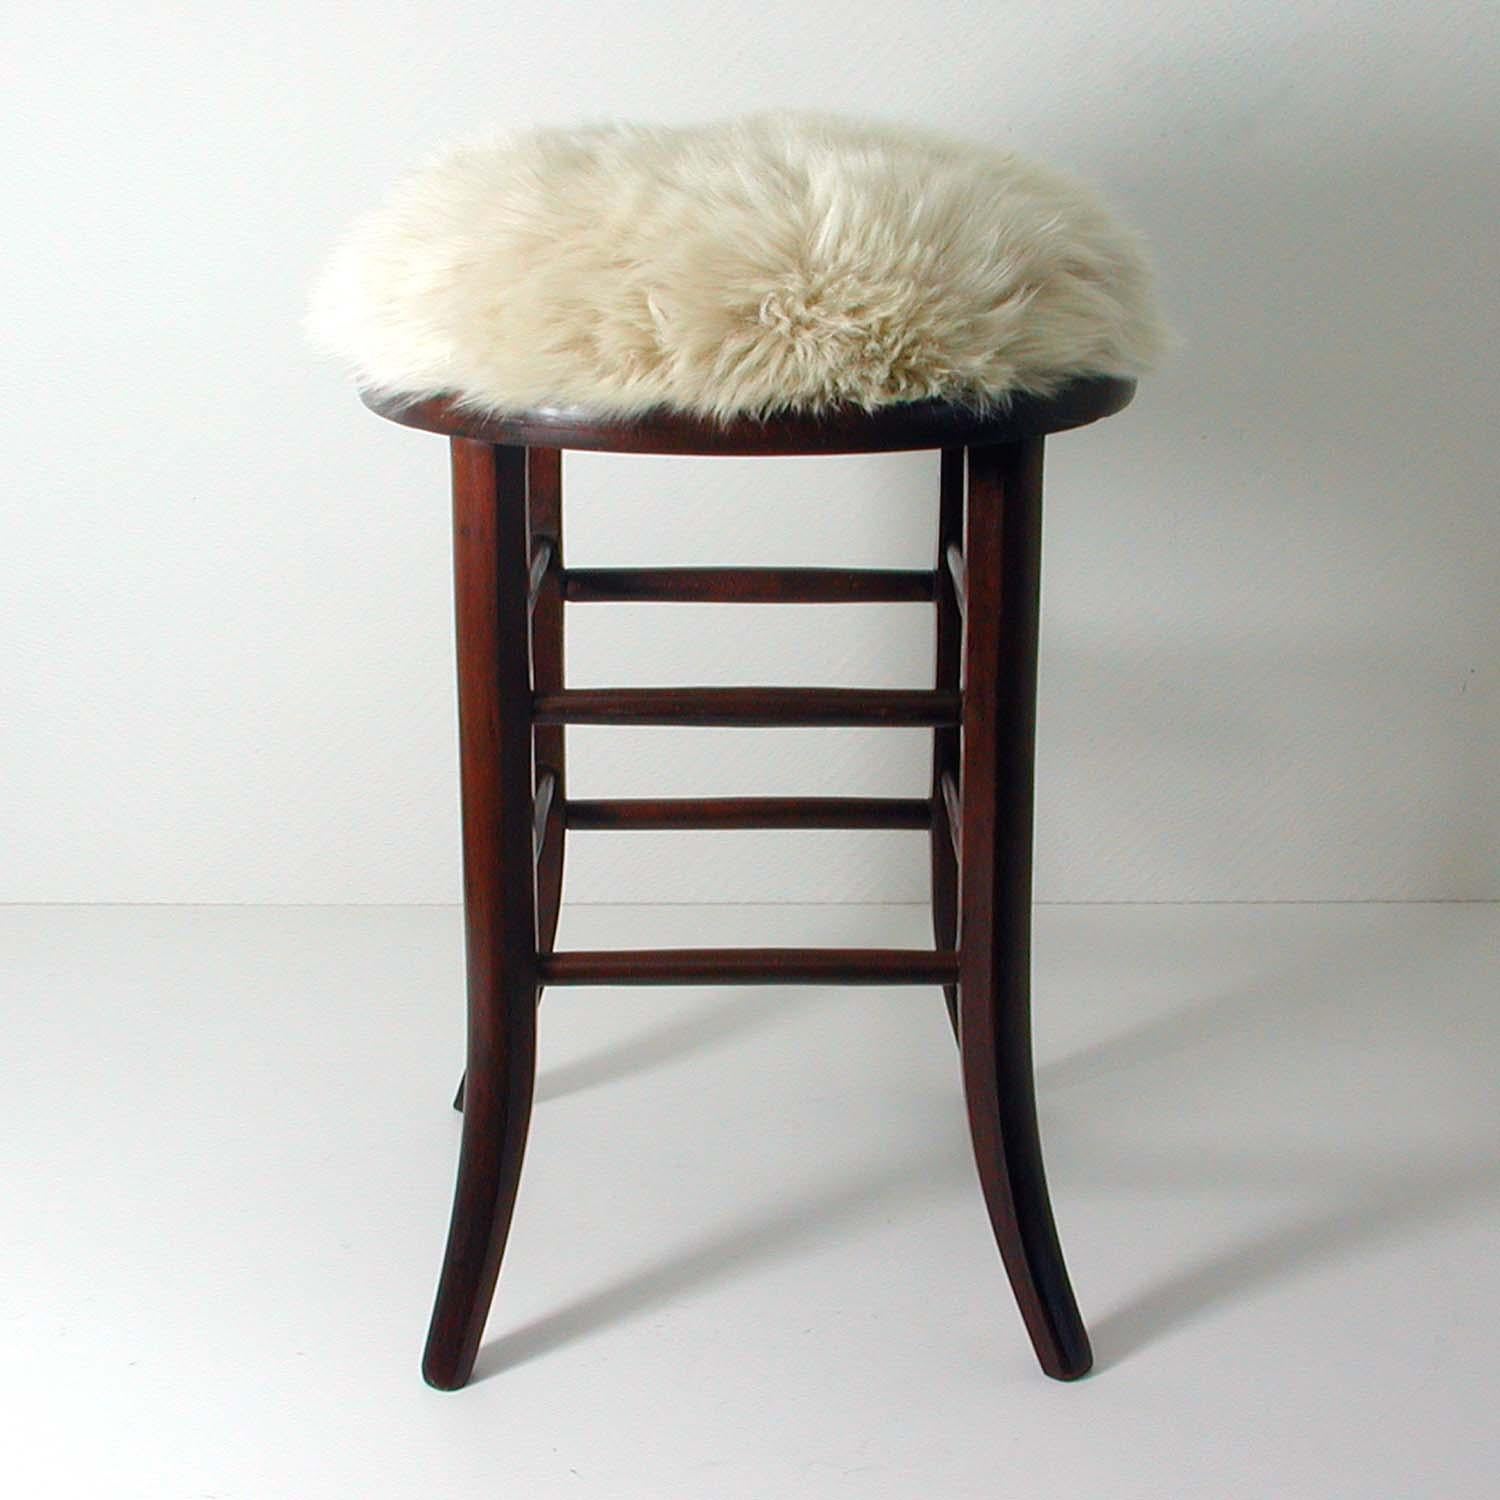 Real Iceland Cream Sheep Lamb and Walnut Upholstered Stool Chair, Austria, 1940s 3